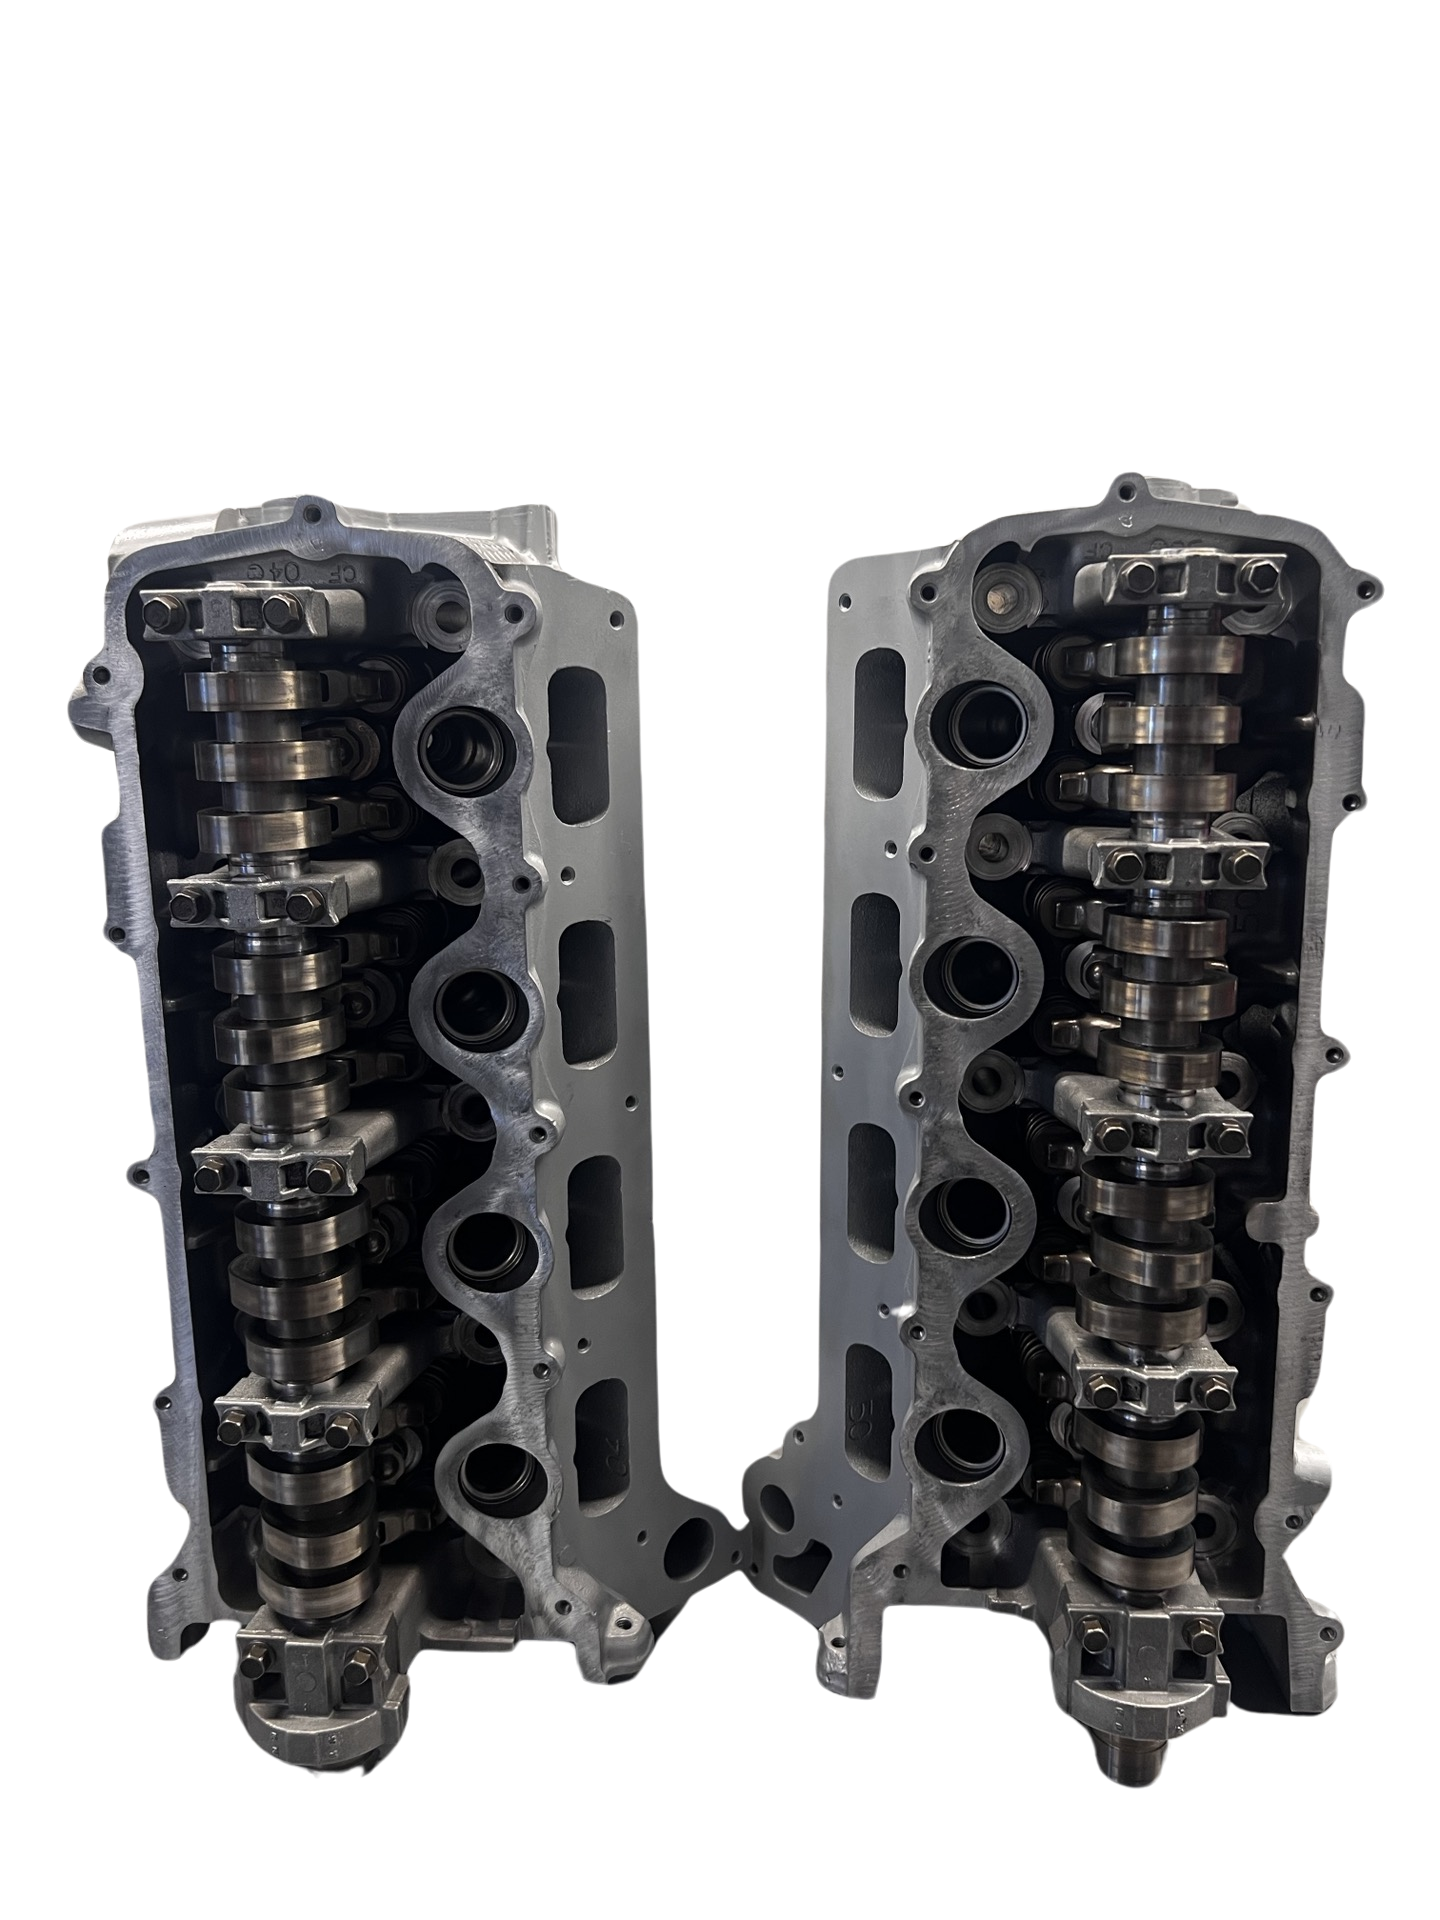 Top view of cylinder heads Ford 2004-2007 Casting #RF-3L3E 4.6L or 5.4L (SOLD IN PAIR)